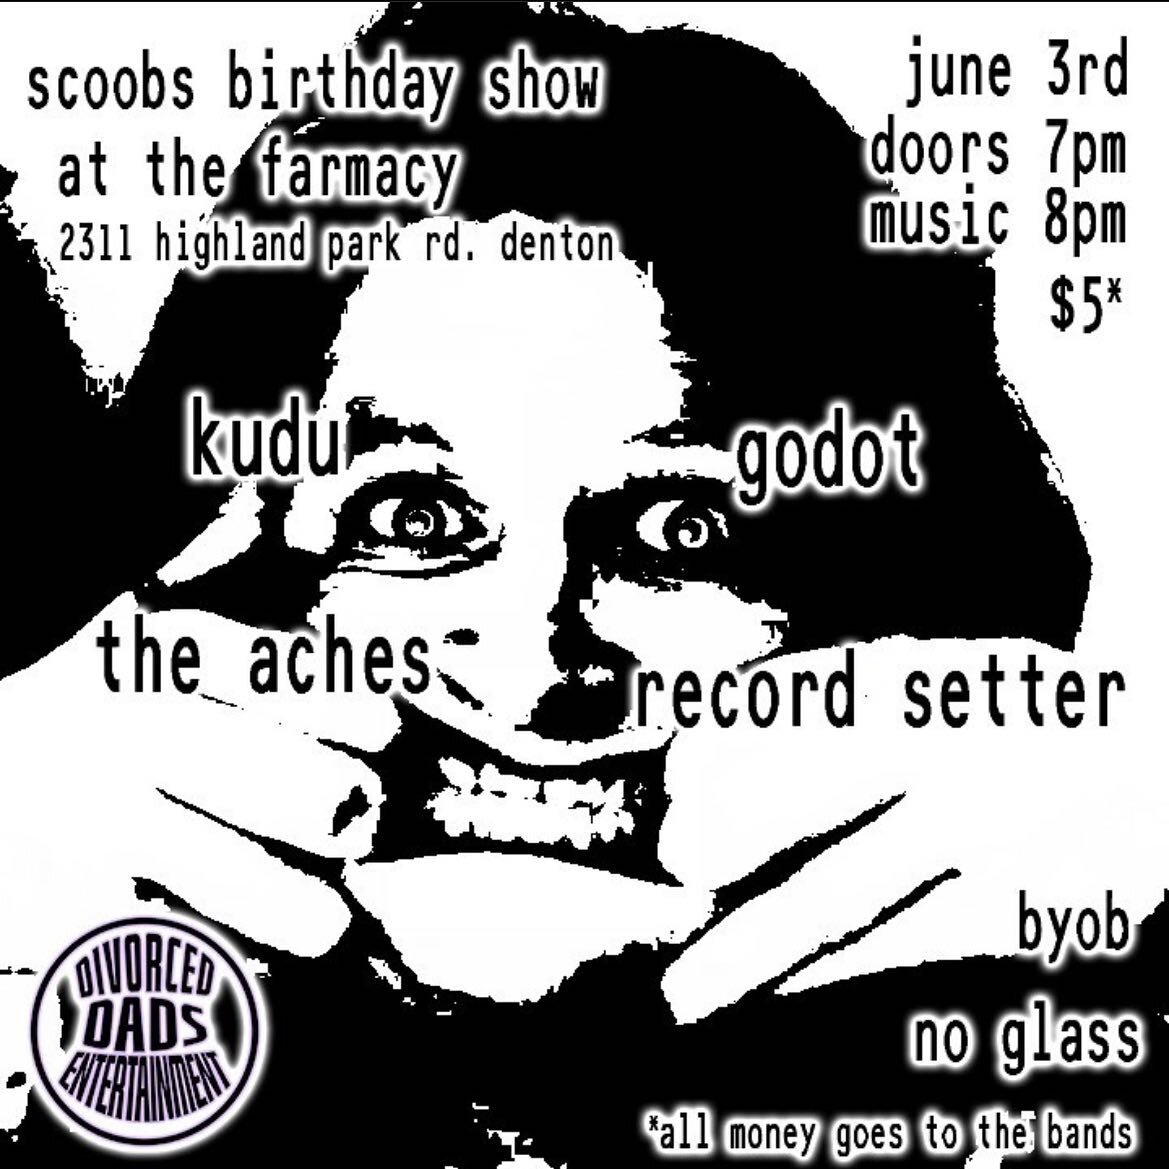 CELEBRATING THE DAY OF SCOOB! @scoobfromdde 

VISIT THE FARMACY ON JUNE 3RD AND WISH THE ONE AND ONLY SCOOB A HAPPY BIRTHDAY WHILE JAMMIN TO SOME WICKED TUNES FROM LOCAL ARTISTS:

@theachesband 
@_kuduofficial_ 
@godottx 
@recordsettertx 

AND FOLLOW